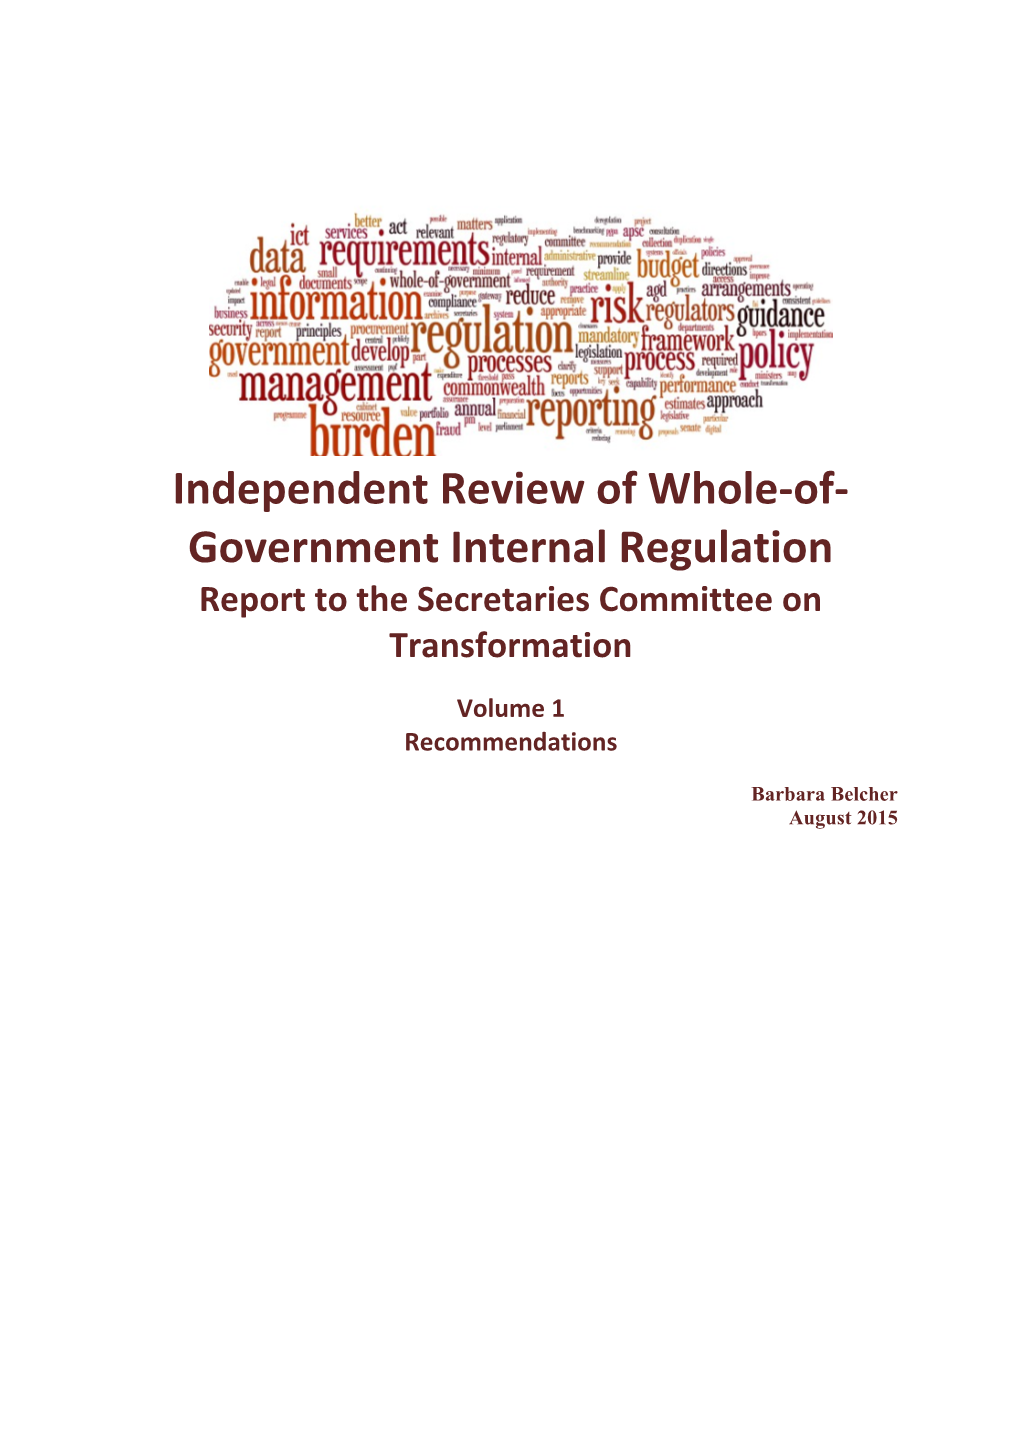 The Independent Review of Whole-Of-Government Internal Regulation (Belcher Red Tape Review)